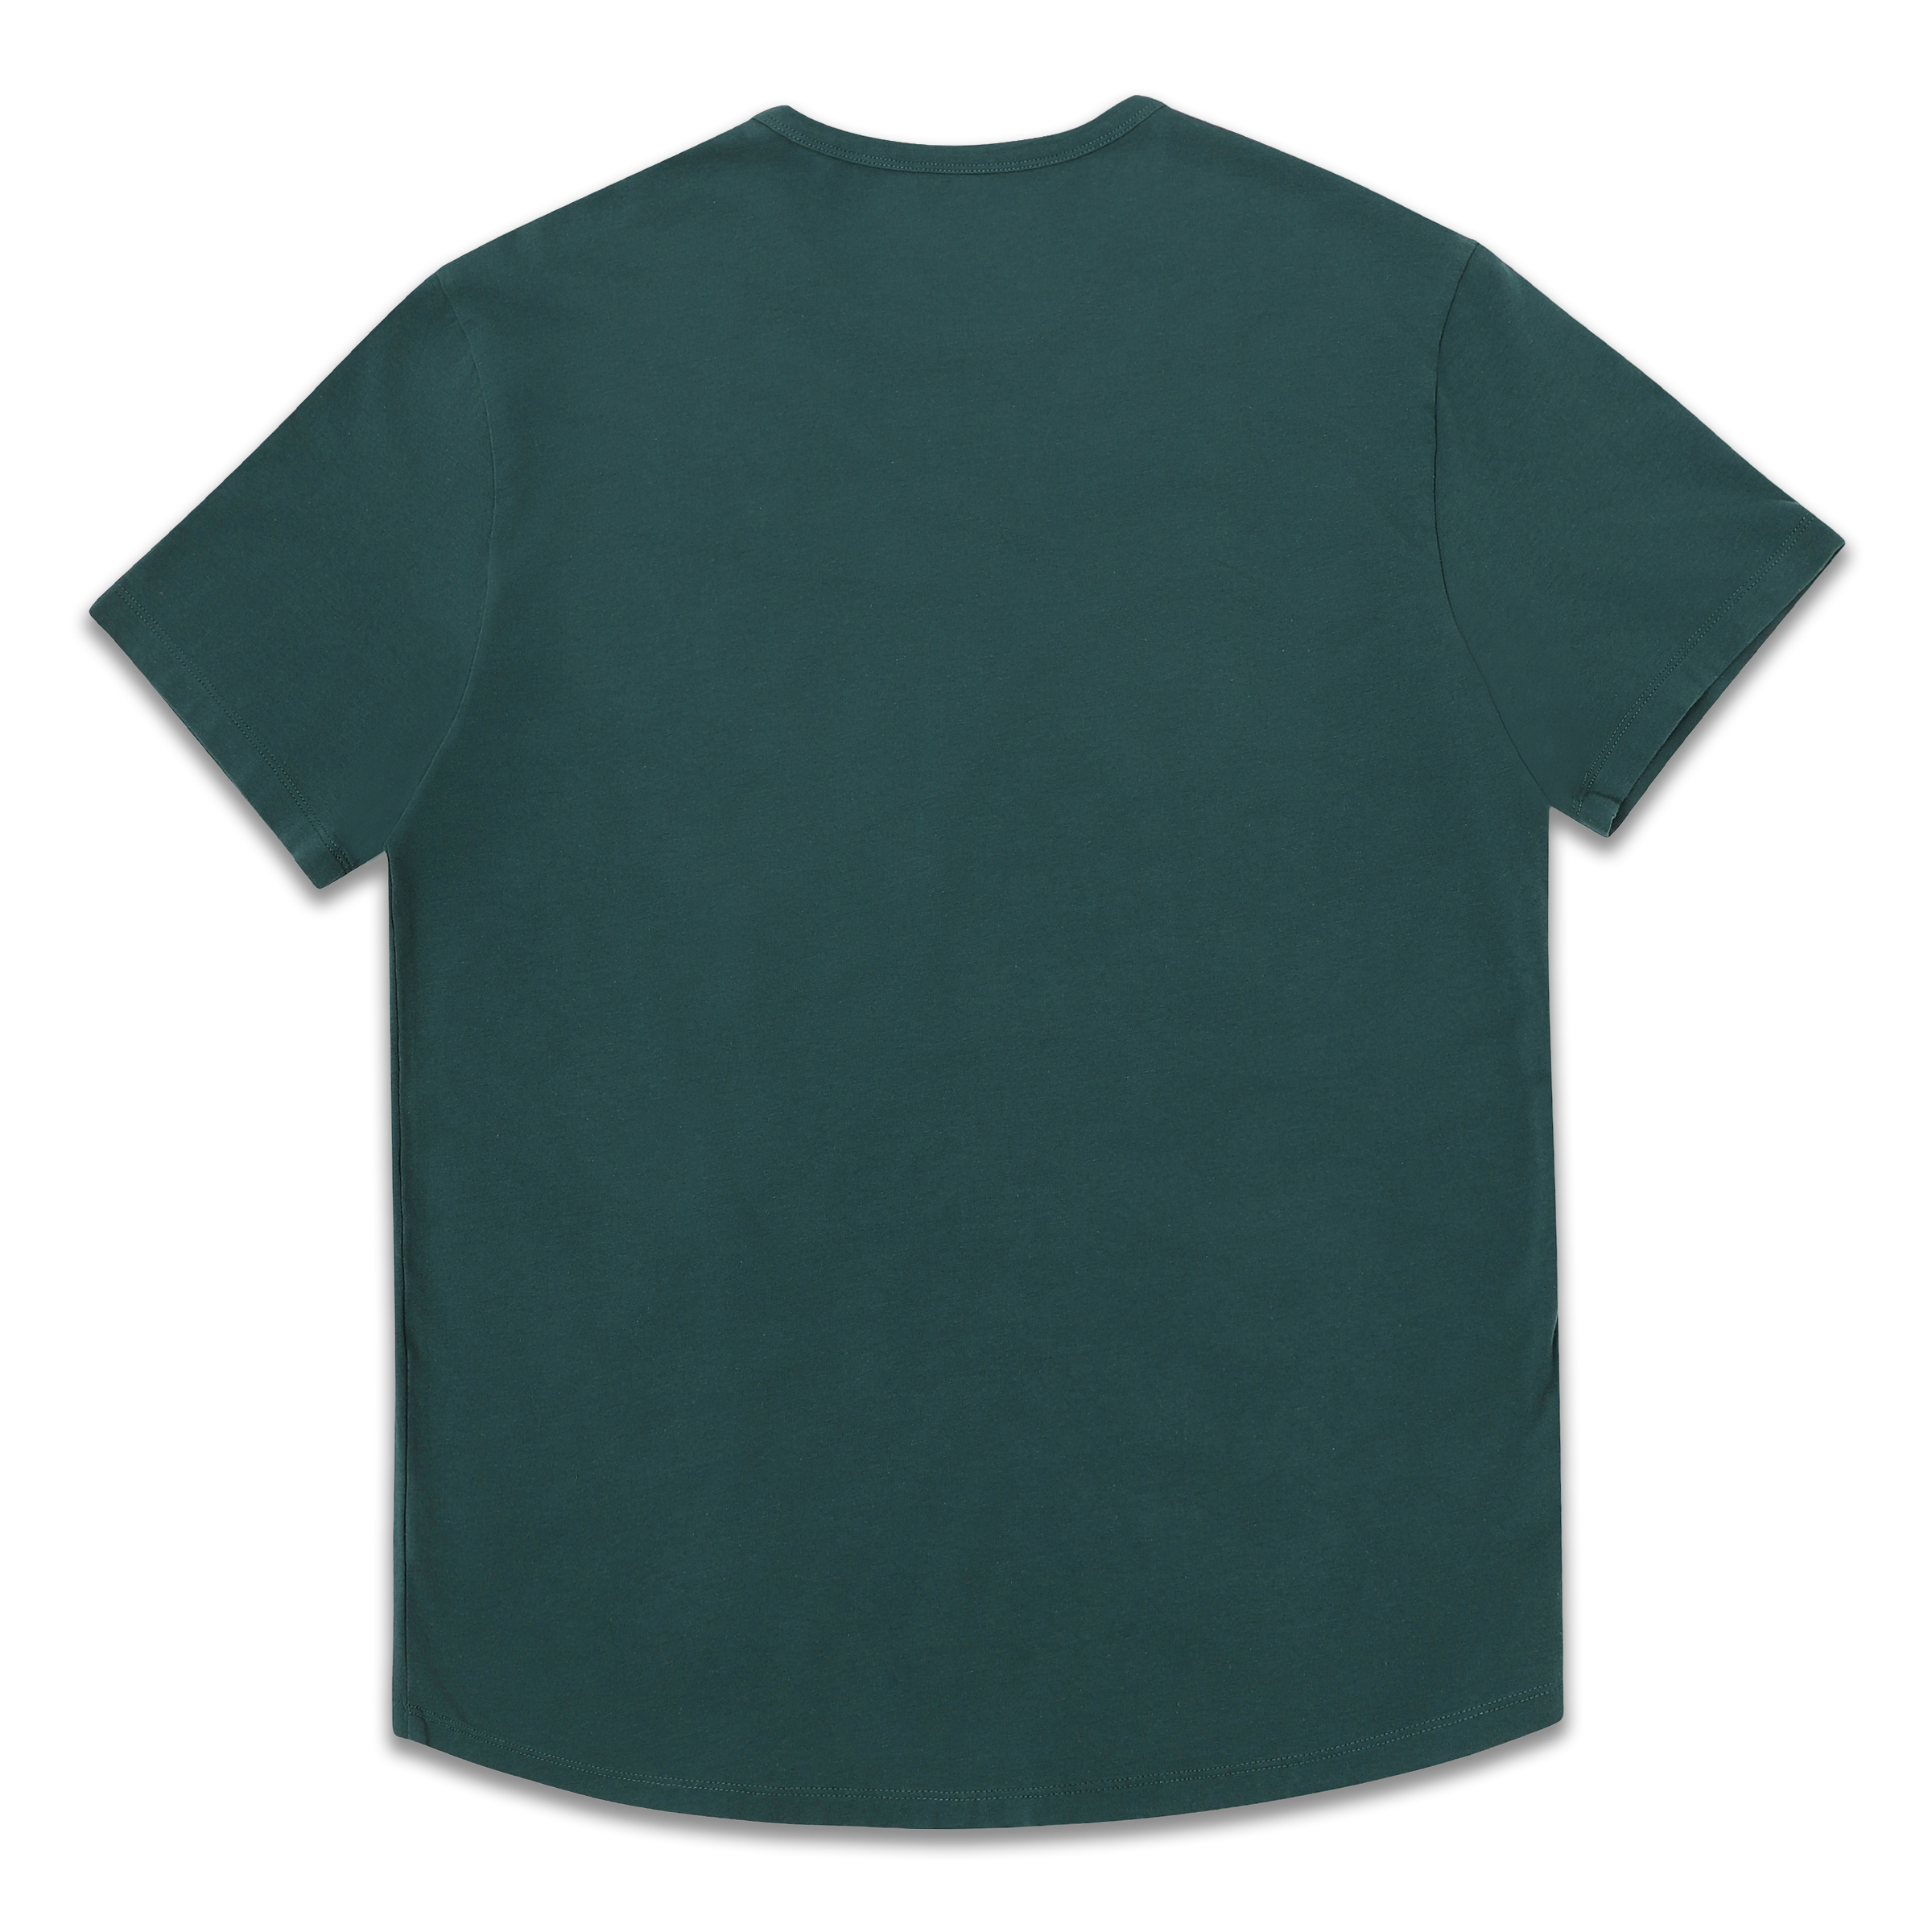 Supima Curved Tee Field Green back with crewneck, curved bottom hem, and short sleeves